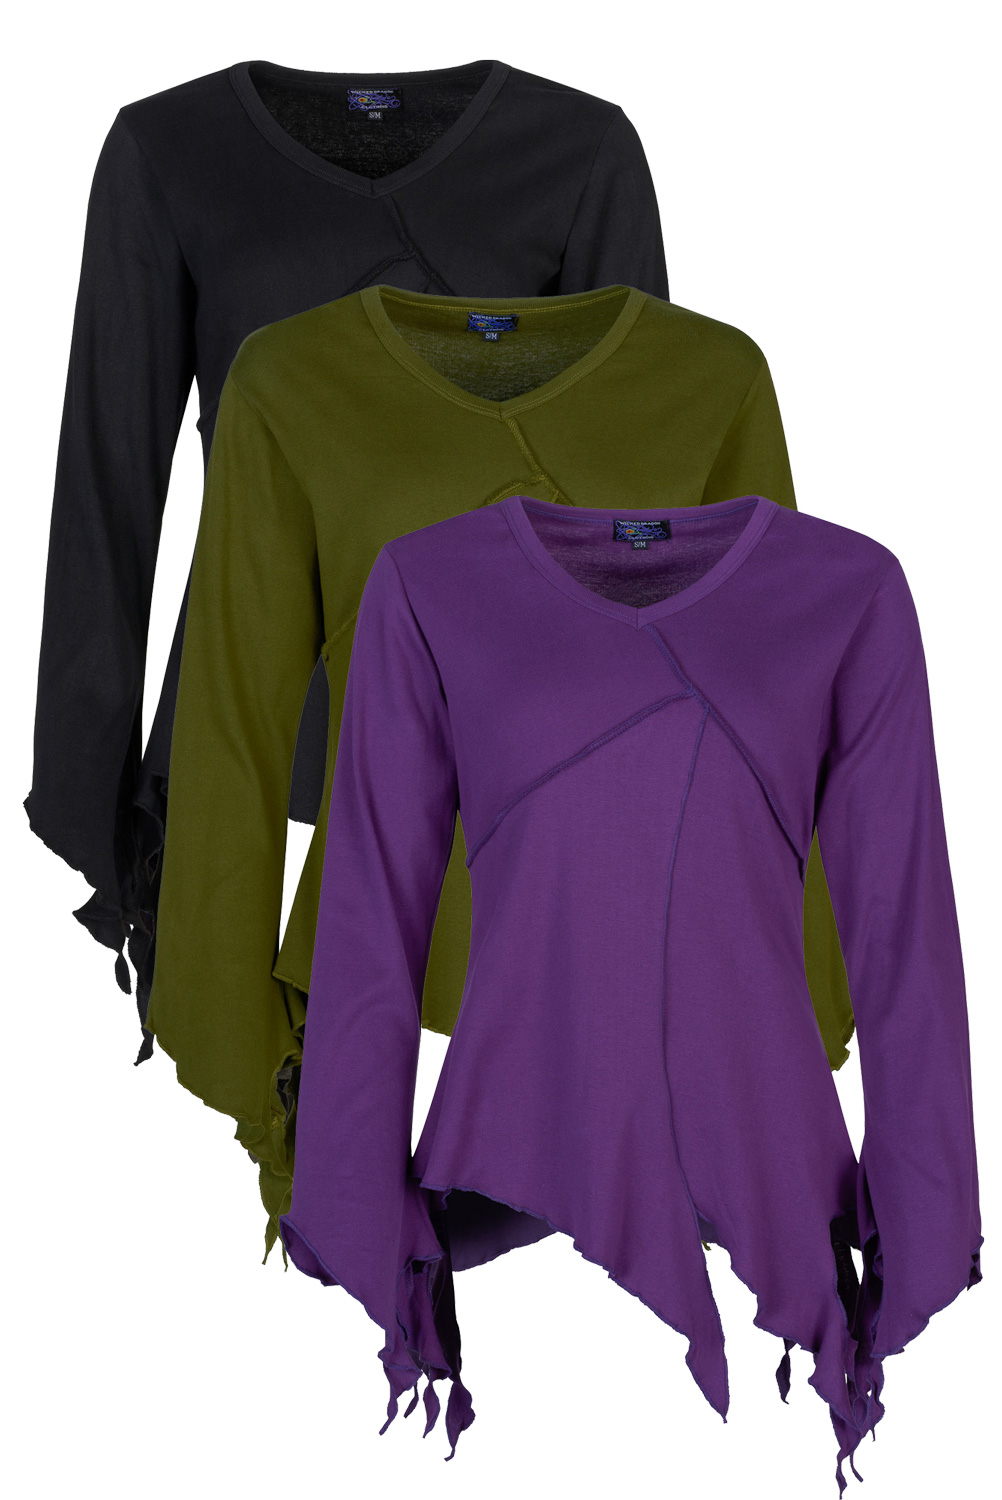 Long sleeve pixie top with pointy hem